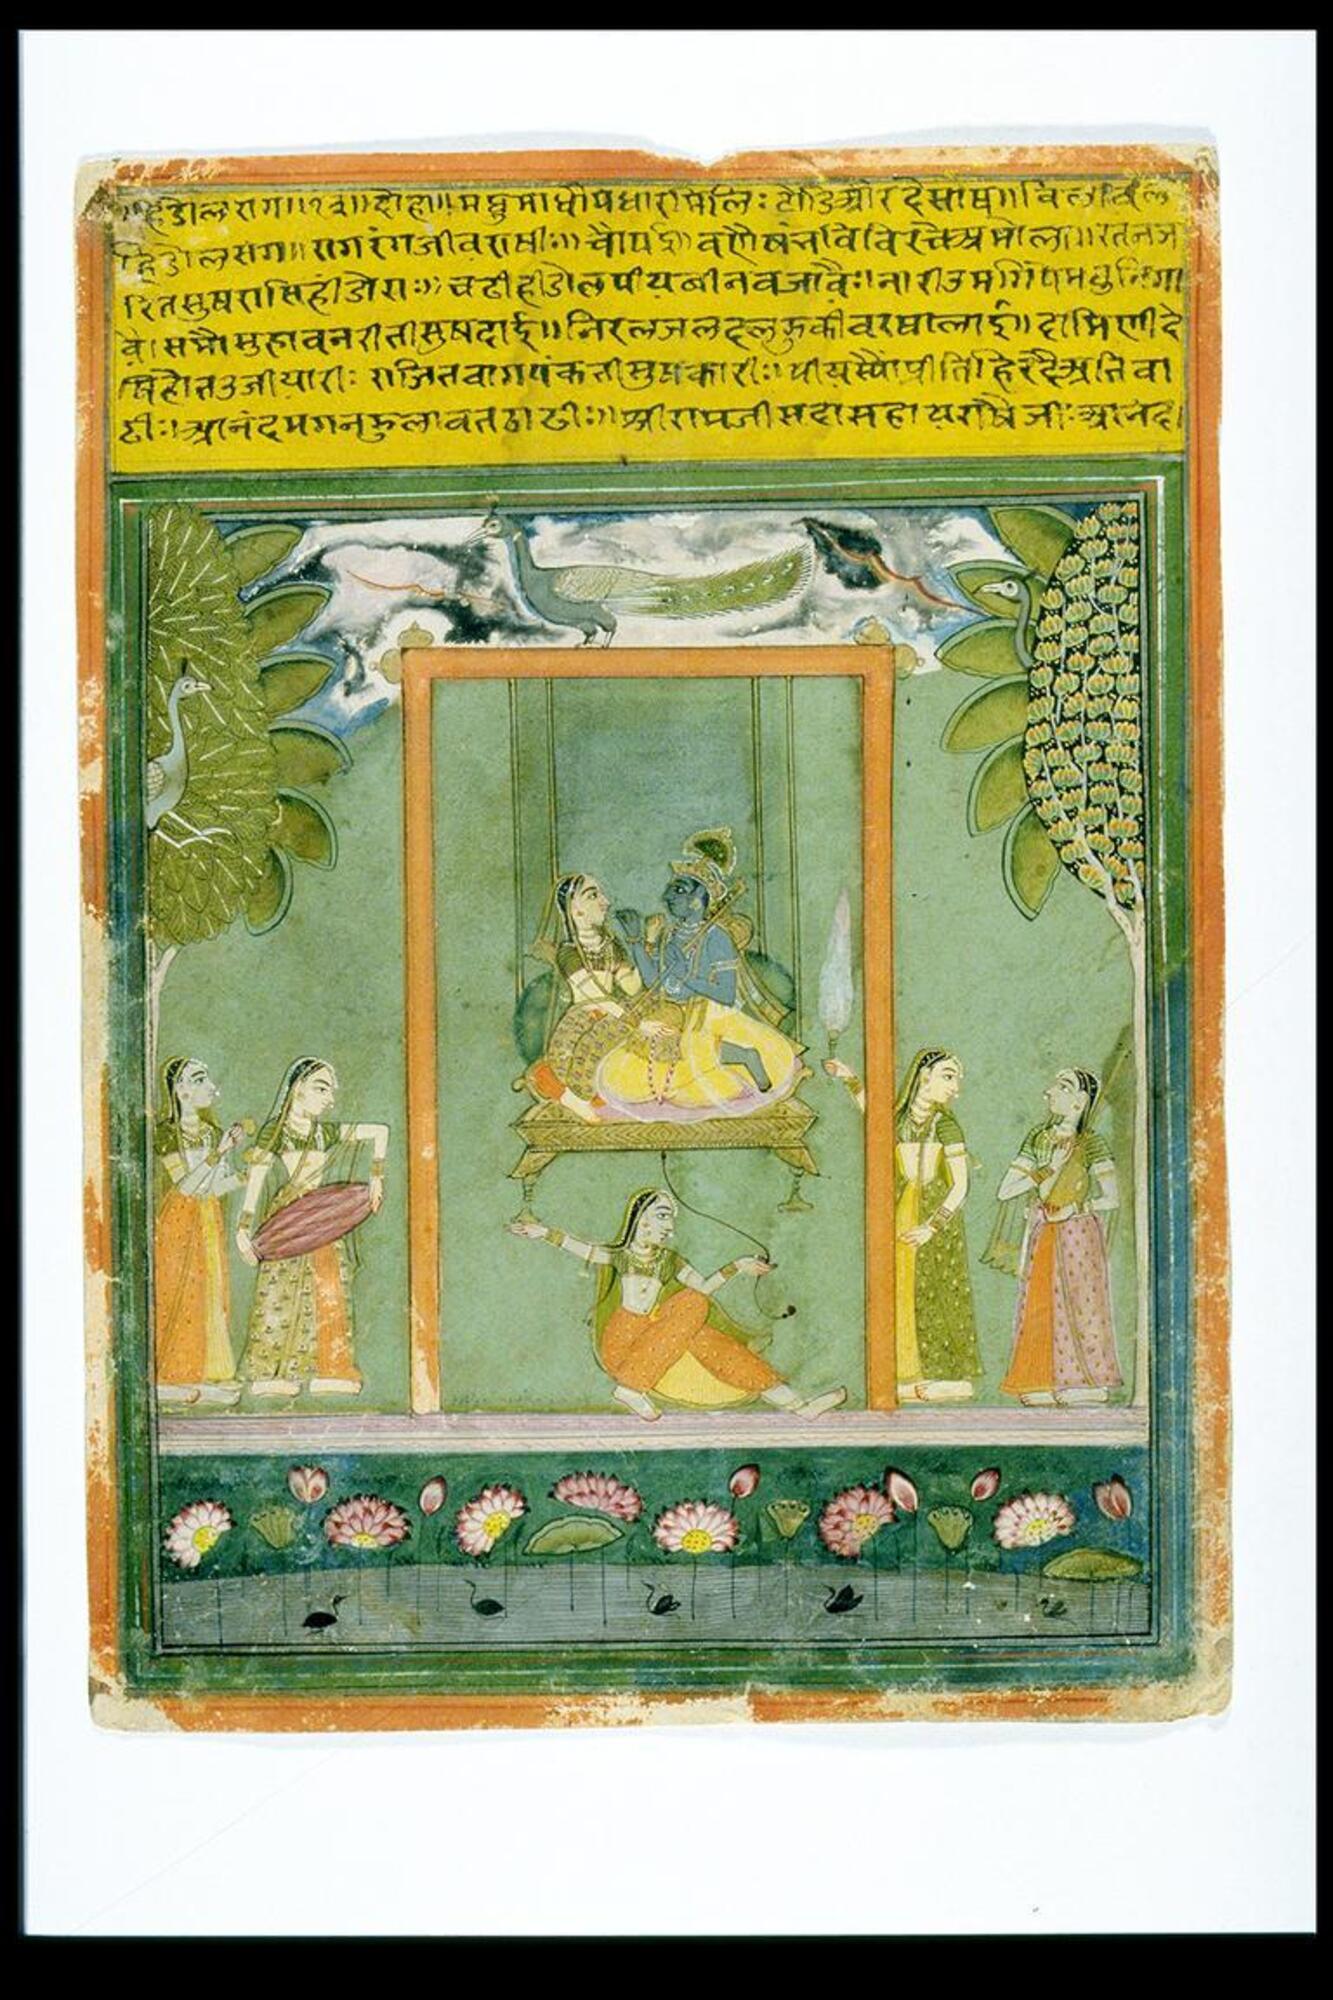 Blue bodied Krishna is shown on the swing with Radha. A peacock stands above the swing frame, and two other peacocks are shown, peering out of the trees shown on the left and right. Five attendants surround the divine couple. One holds the string that, when drawn, will provide the swing its motion; three hold musical instruments, and the fifth a fly whisk. The setting is an open-air garden-like space, with lotuses in the water depicted below the human figures.